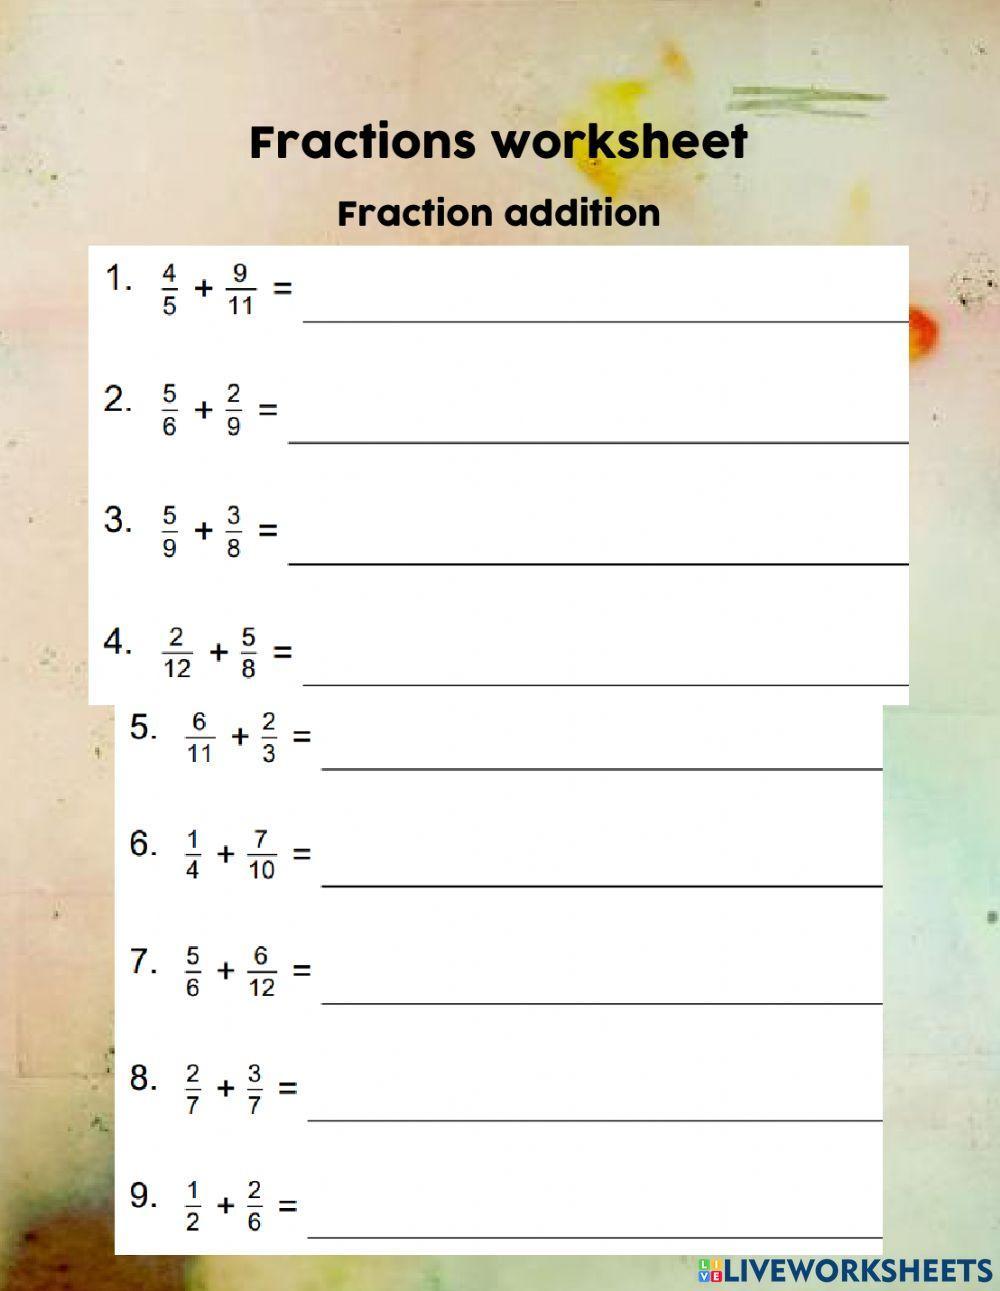 Fractions addition and subtraction